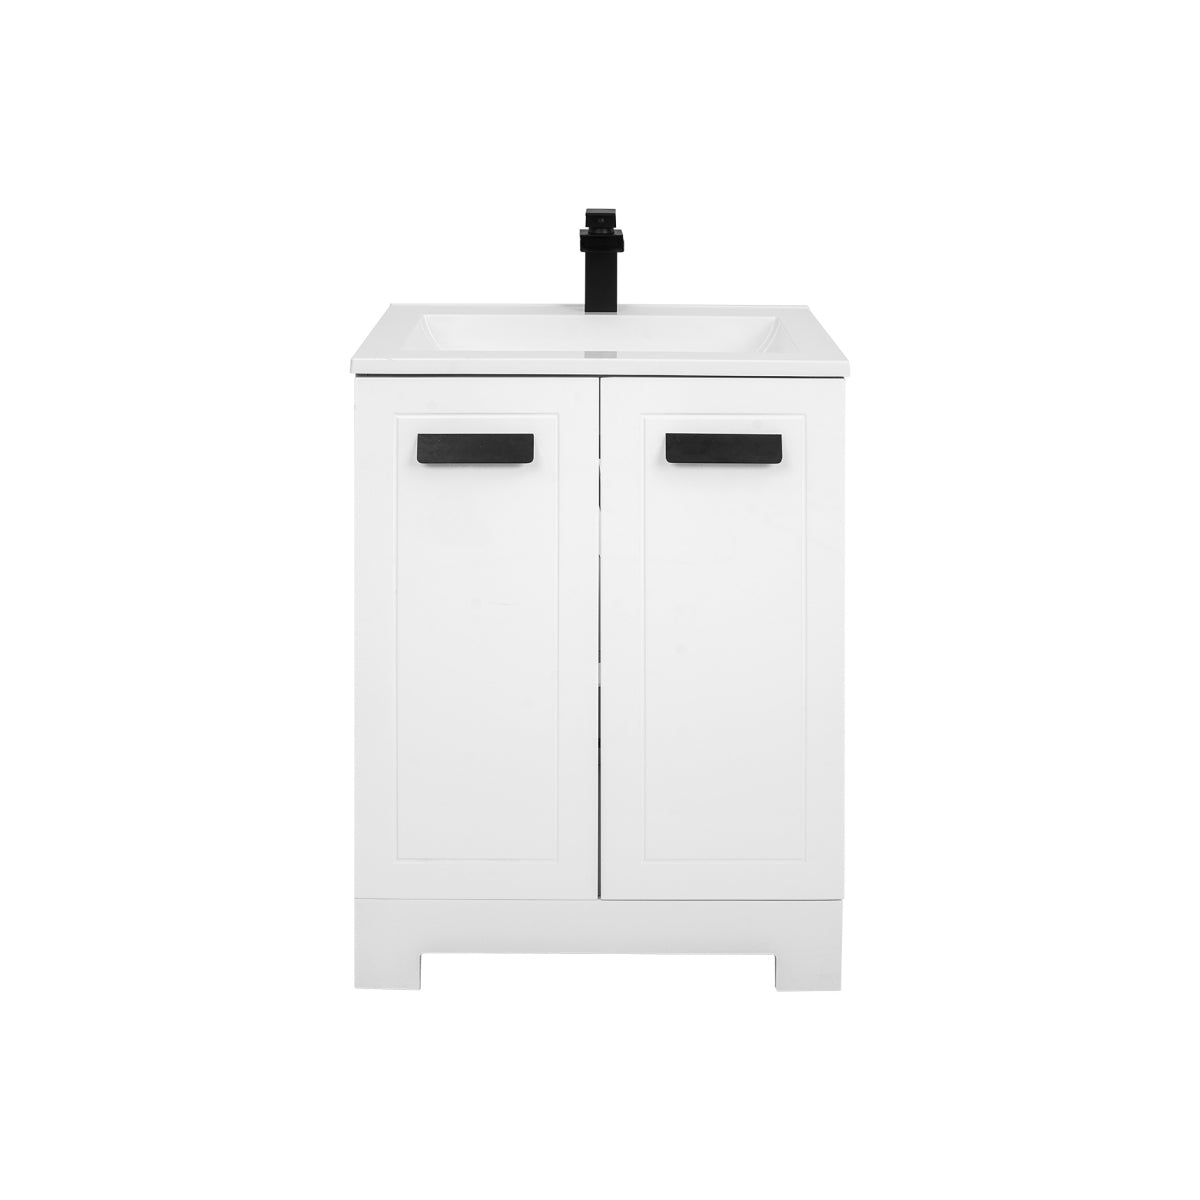 Elecwish Bathroom Vanity, 24 inch Modern Stand Pedestal Wooden Bathroom Cabinet with Undermount Sink Combo with faucet